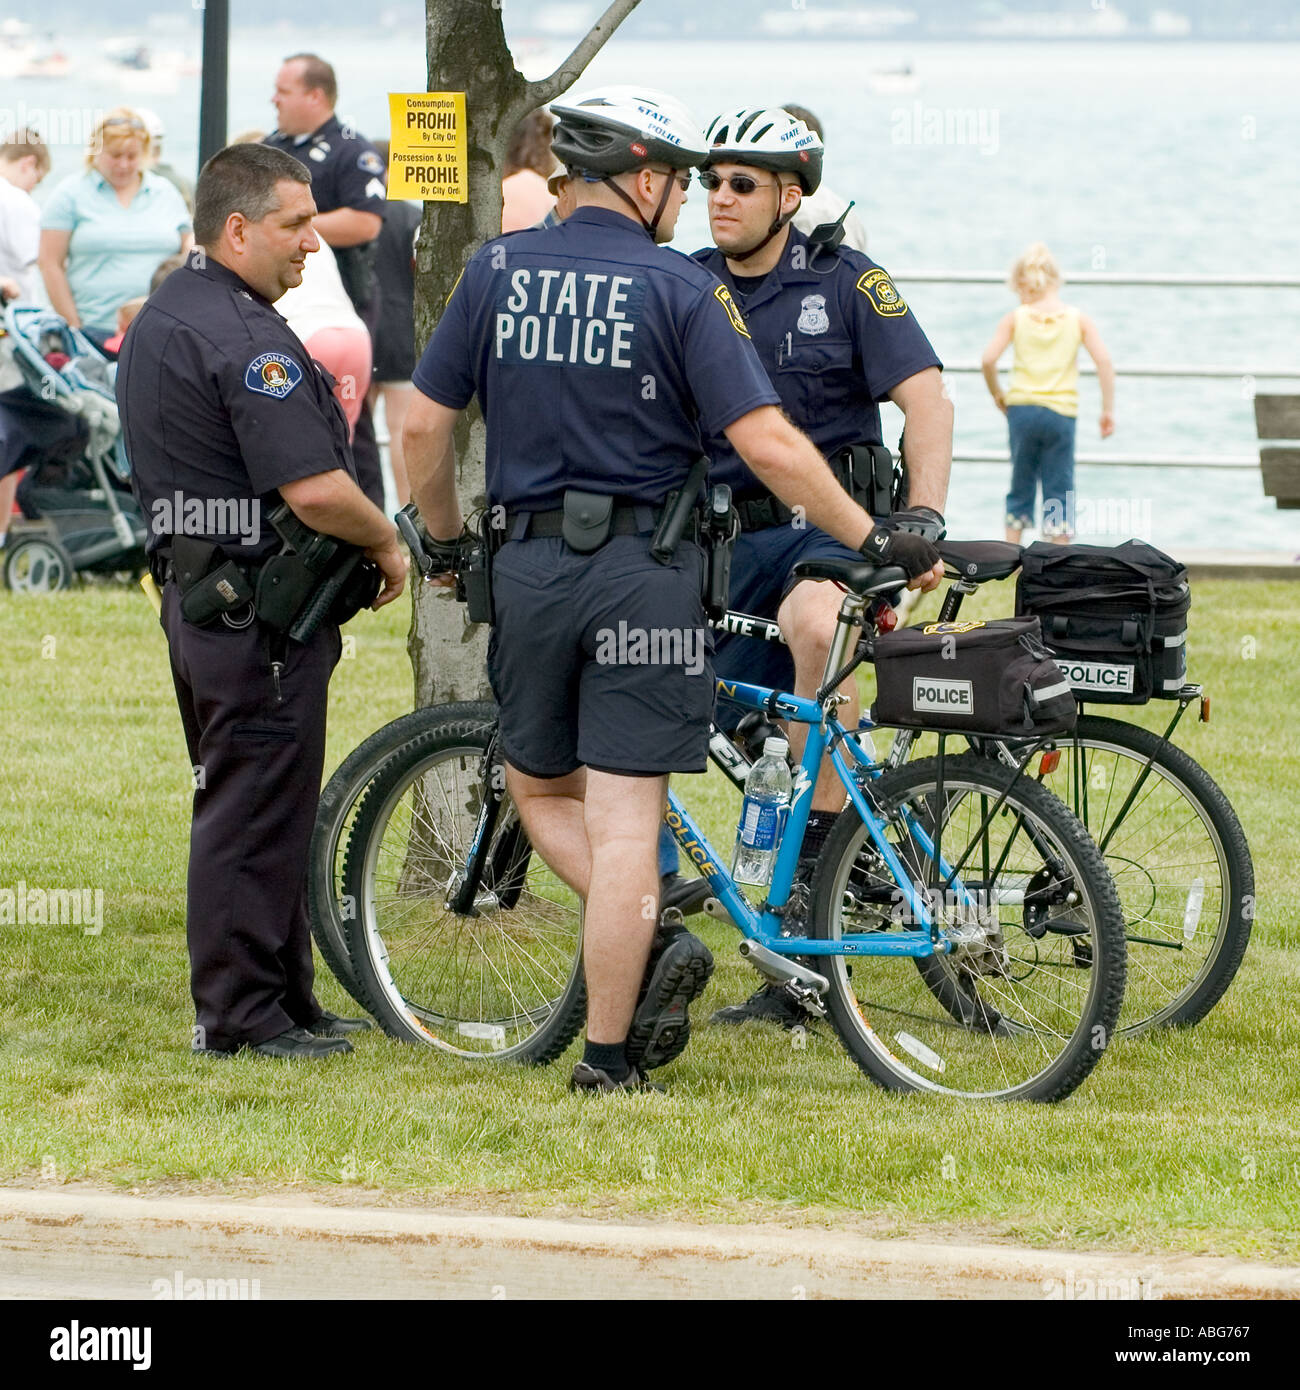 Police patrol a public event on bicycles Stock Photo